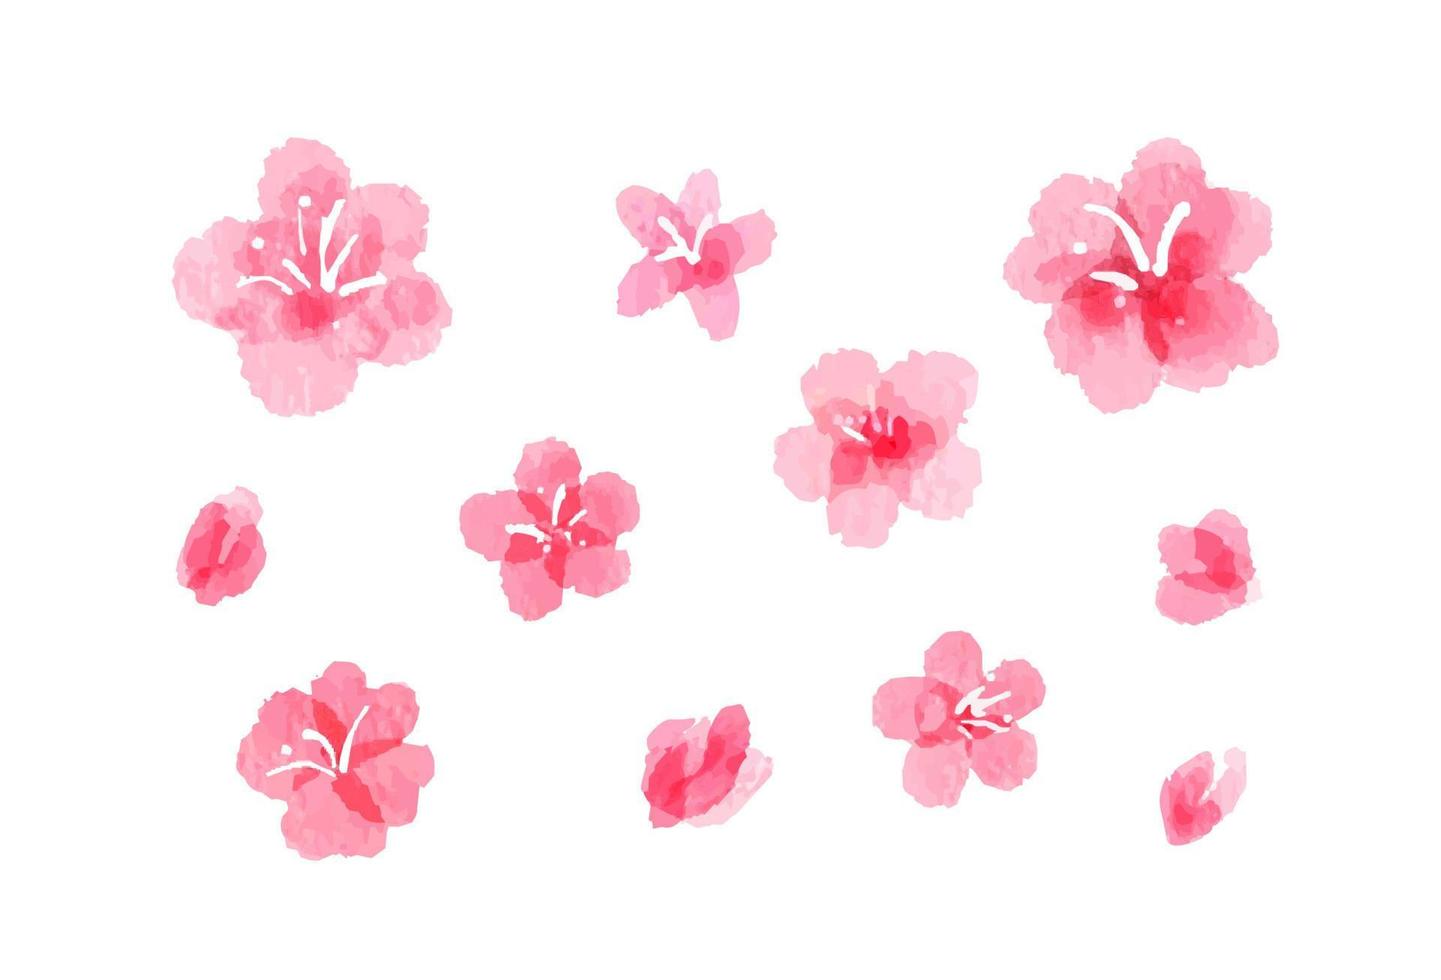 Watercolor images of sakura blossom. Abstract hand painted pink flowers, fully opened and buds. Collection of feminine aquarelle springtime design elements with soft color scheme, isolated on white vector